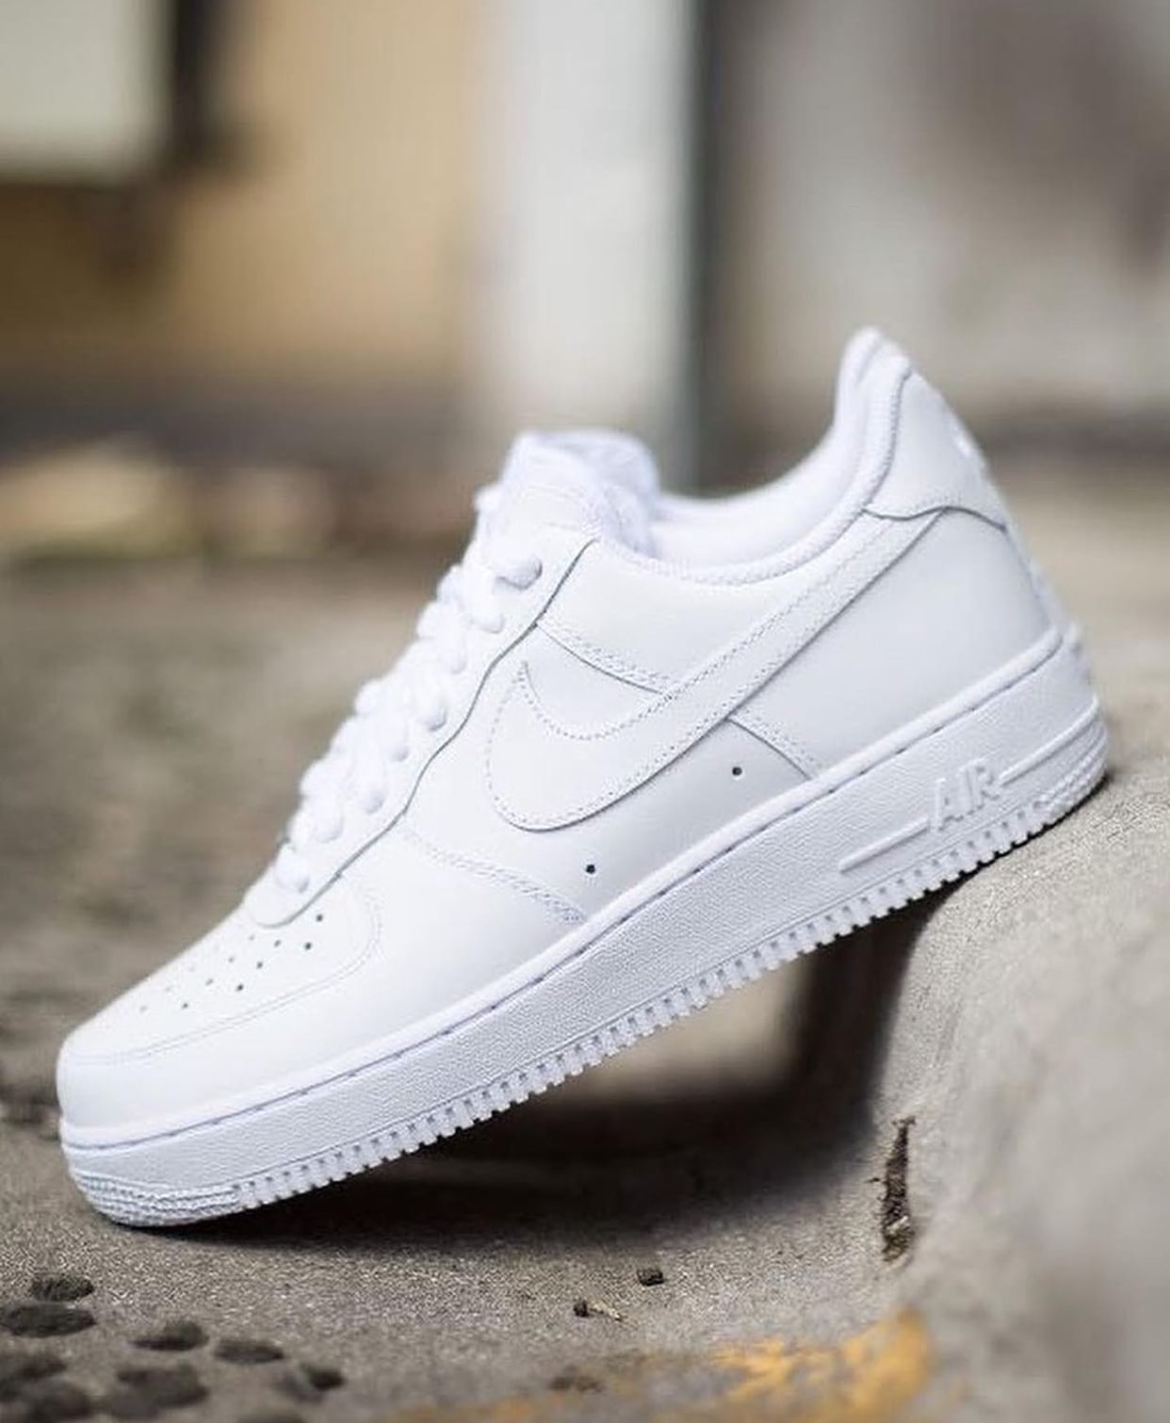 Nike Air Force 1 White. Nike Air Force 1 белые. Nike Air Force 1 Low White. Кроссовки Nike Air Force 1 Low Triple White.